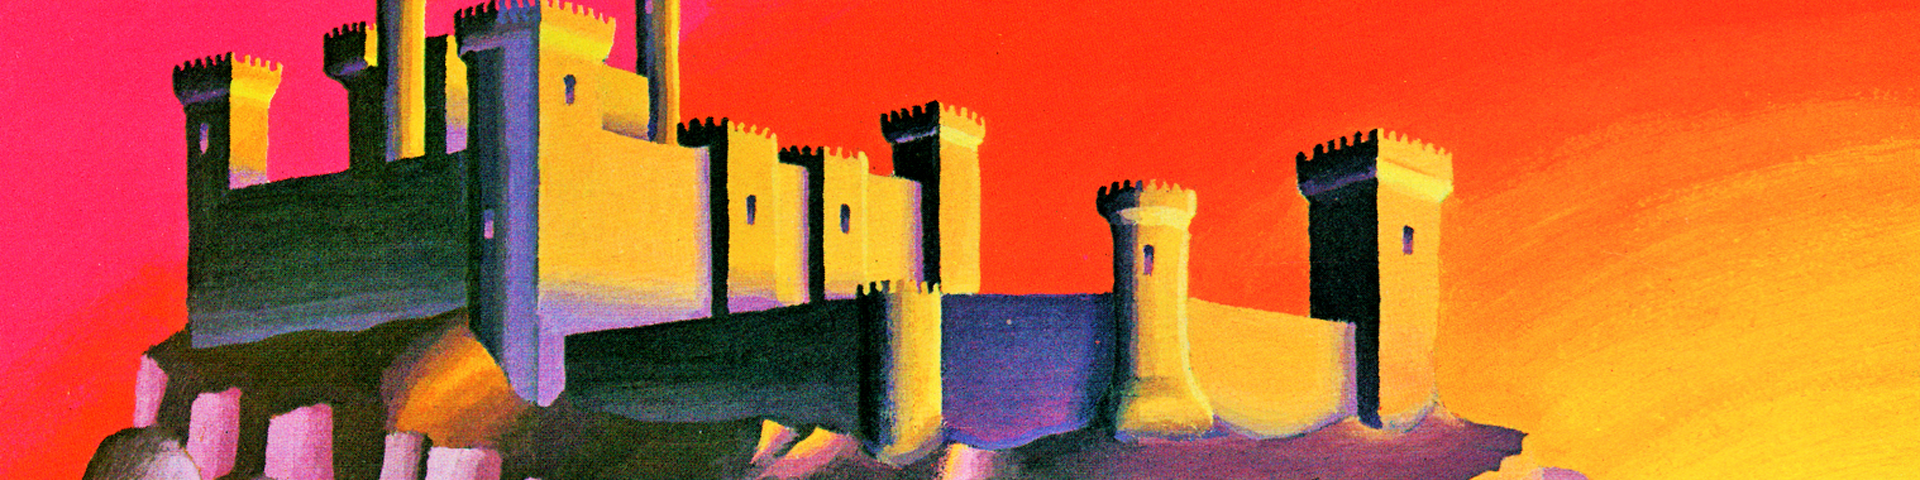 A keep, with high walls and towers, stands against a vibrant red, yellow, and orange background.